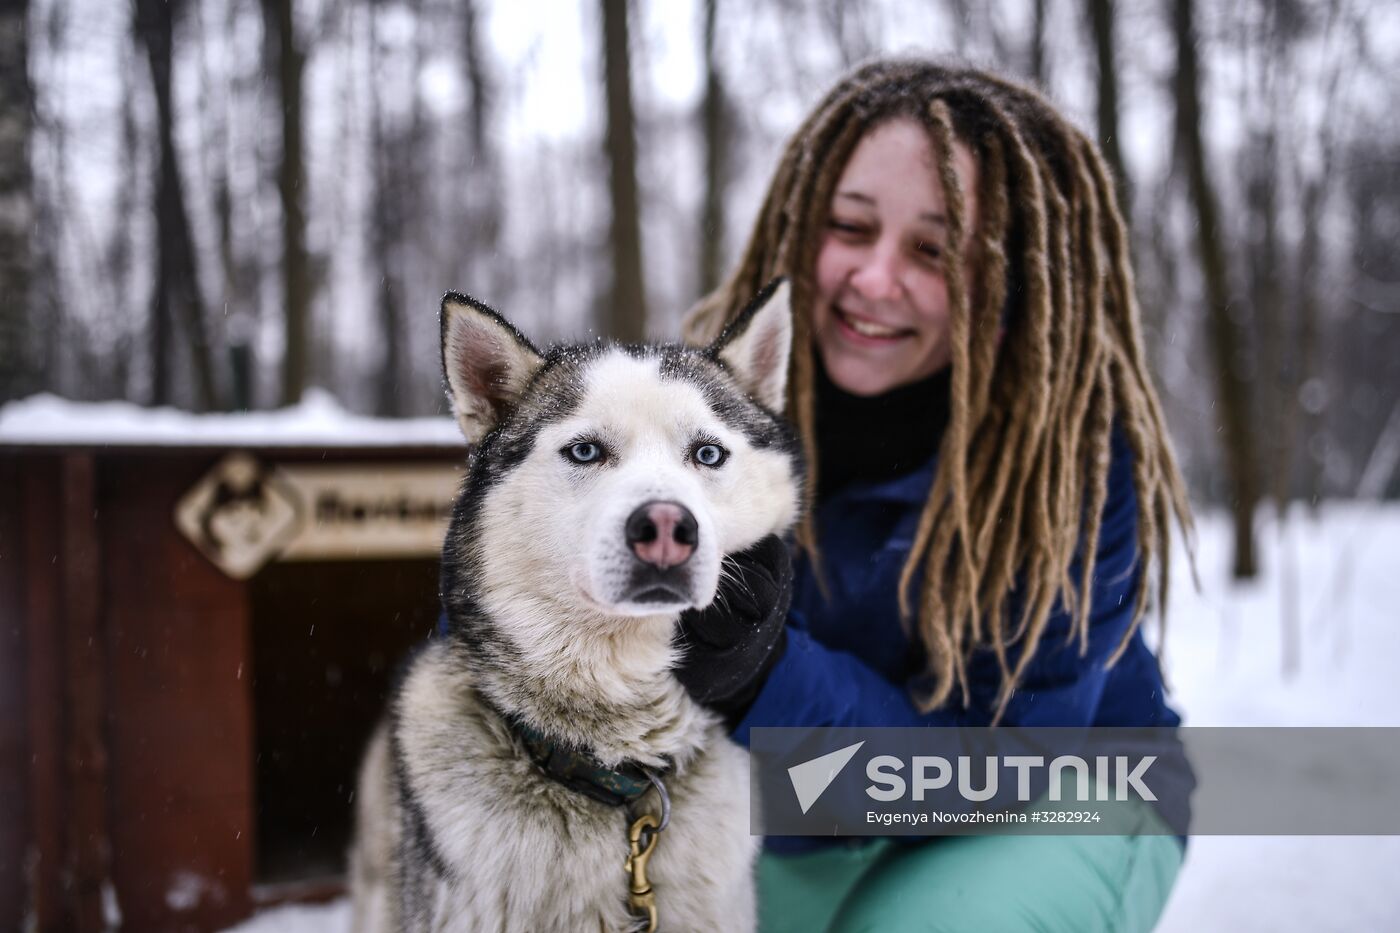 Rehabilitation and educational program 'On the way with Huskies'